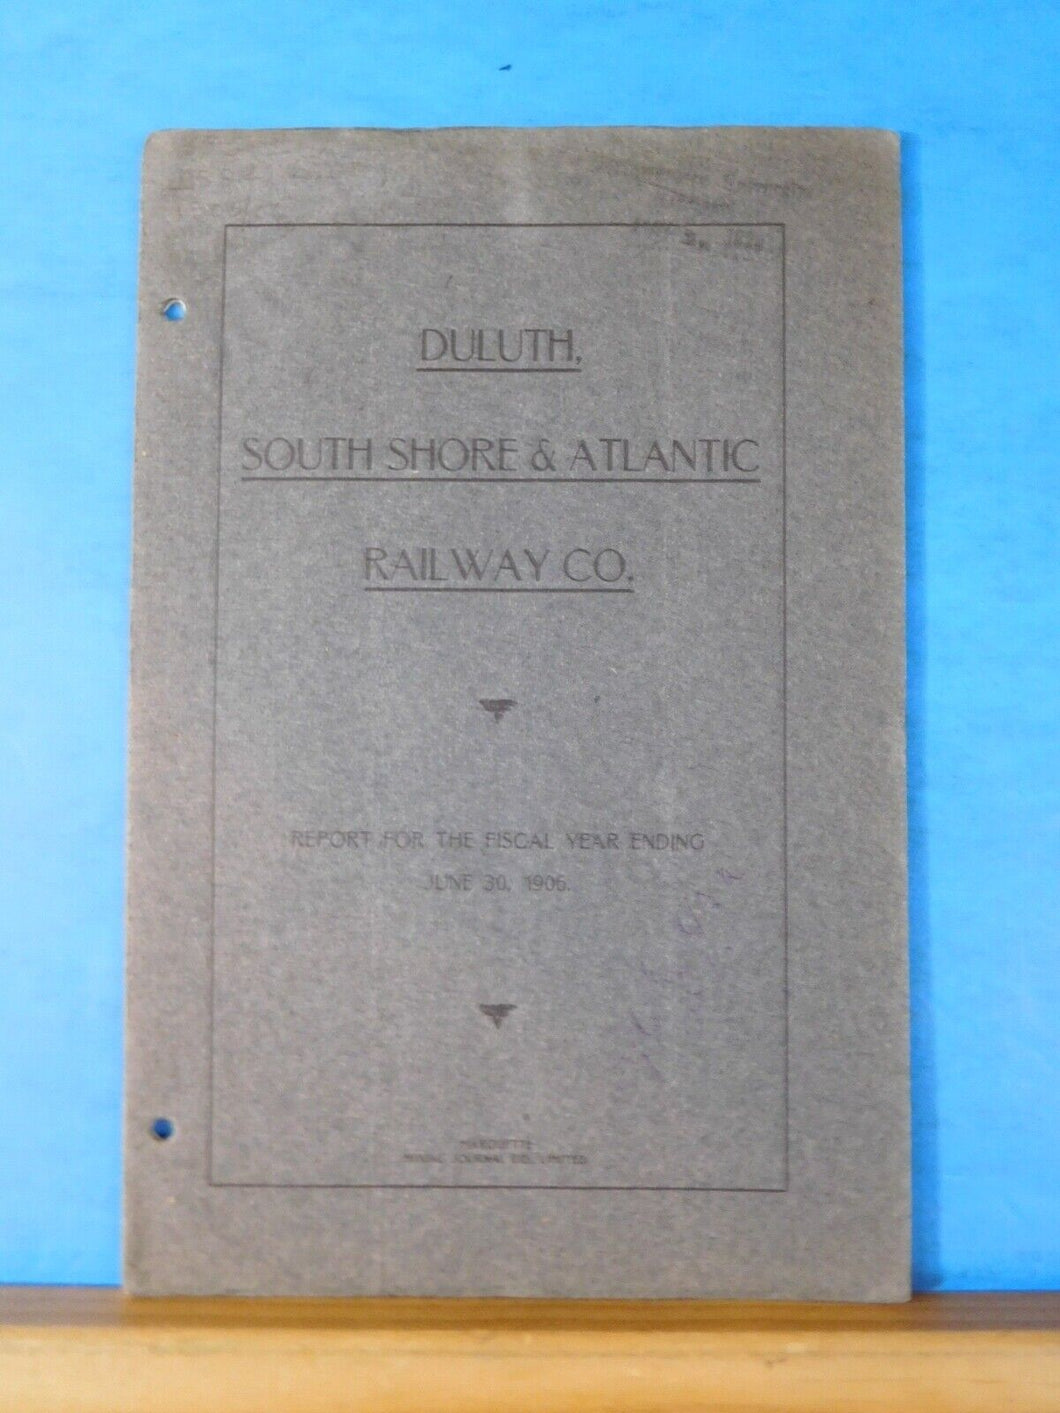 Duluth South Shore & Atlantic Railway Co Annual Report 1906